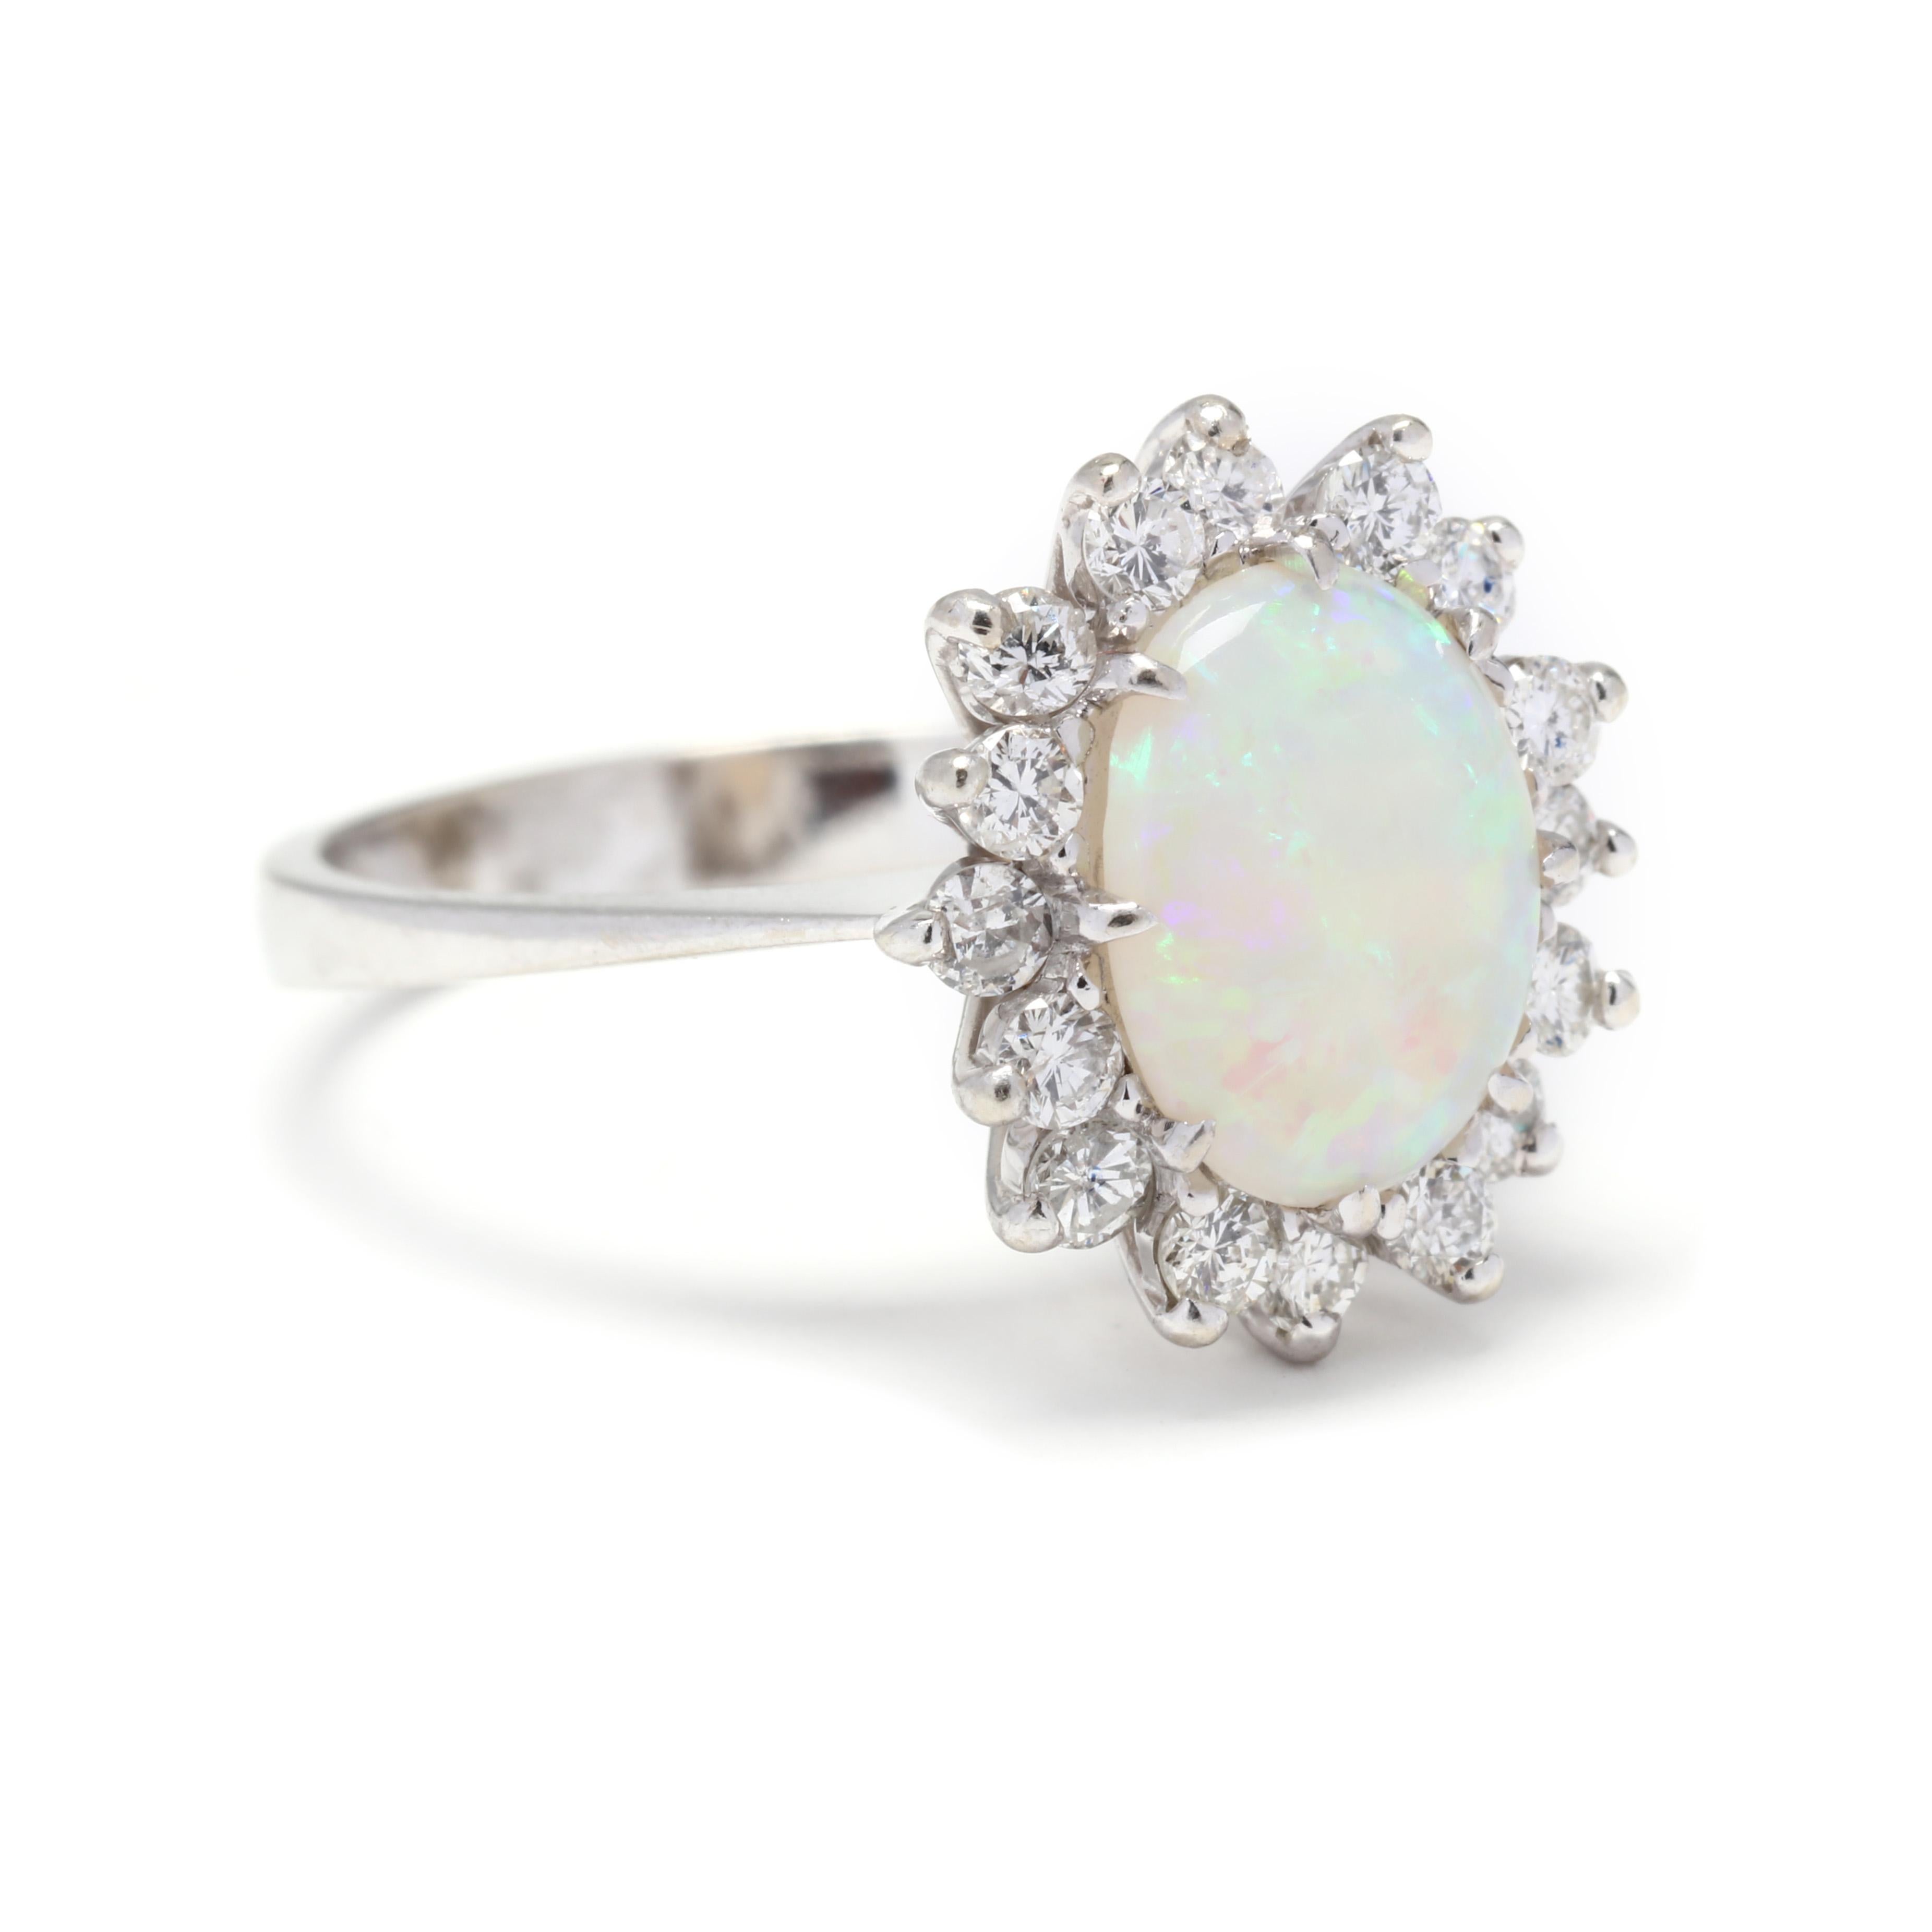 A 14 karat white gold opald diamond ring. This ring features a prong set, oval cabochon opal weighing approximately 1.50 carats surrounded by a halo of full cut round diamonds weighing approximately .56 total carats and with a thing slightly tapered